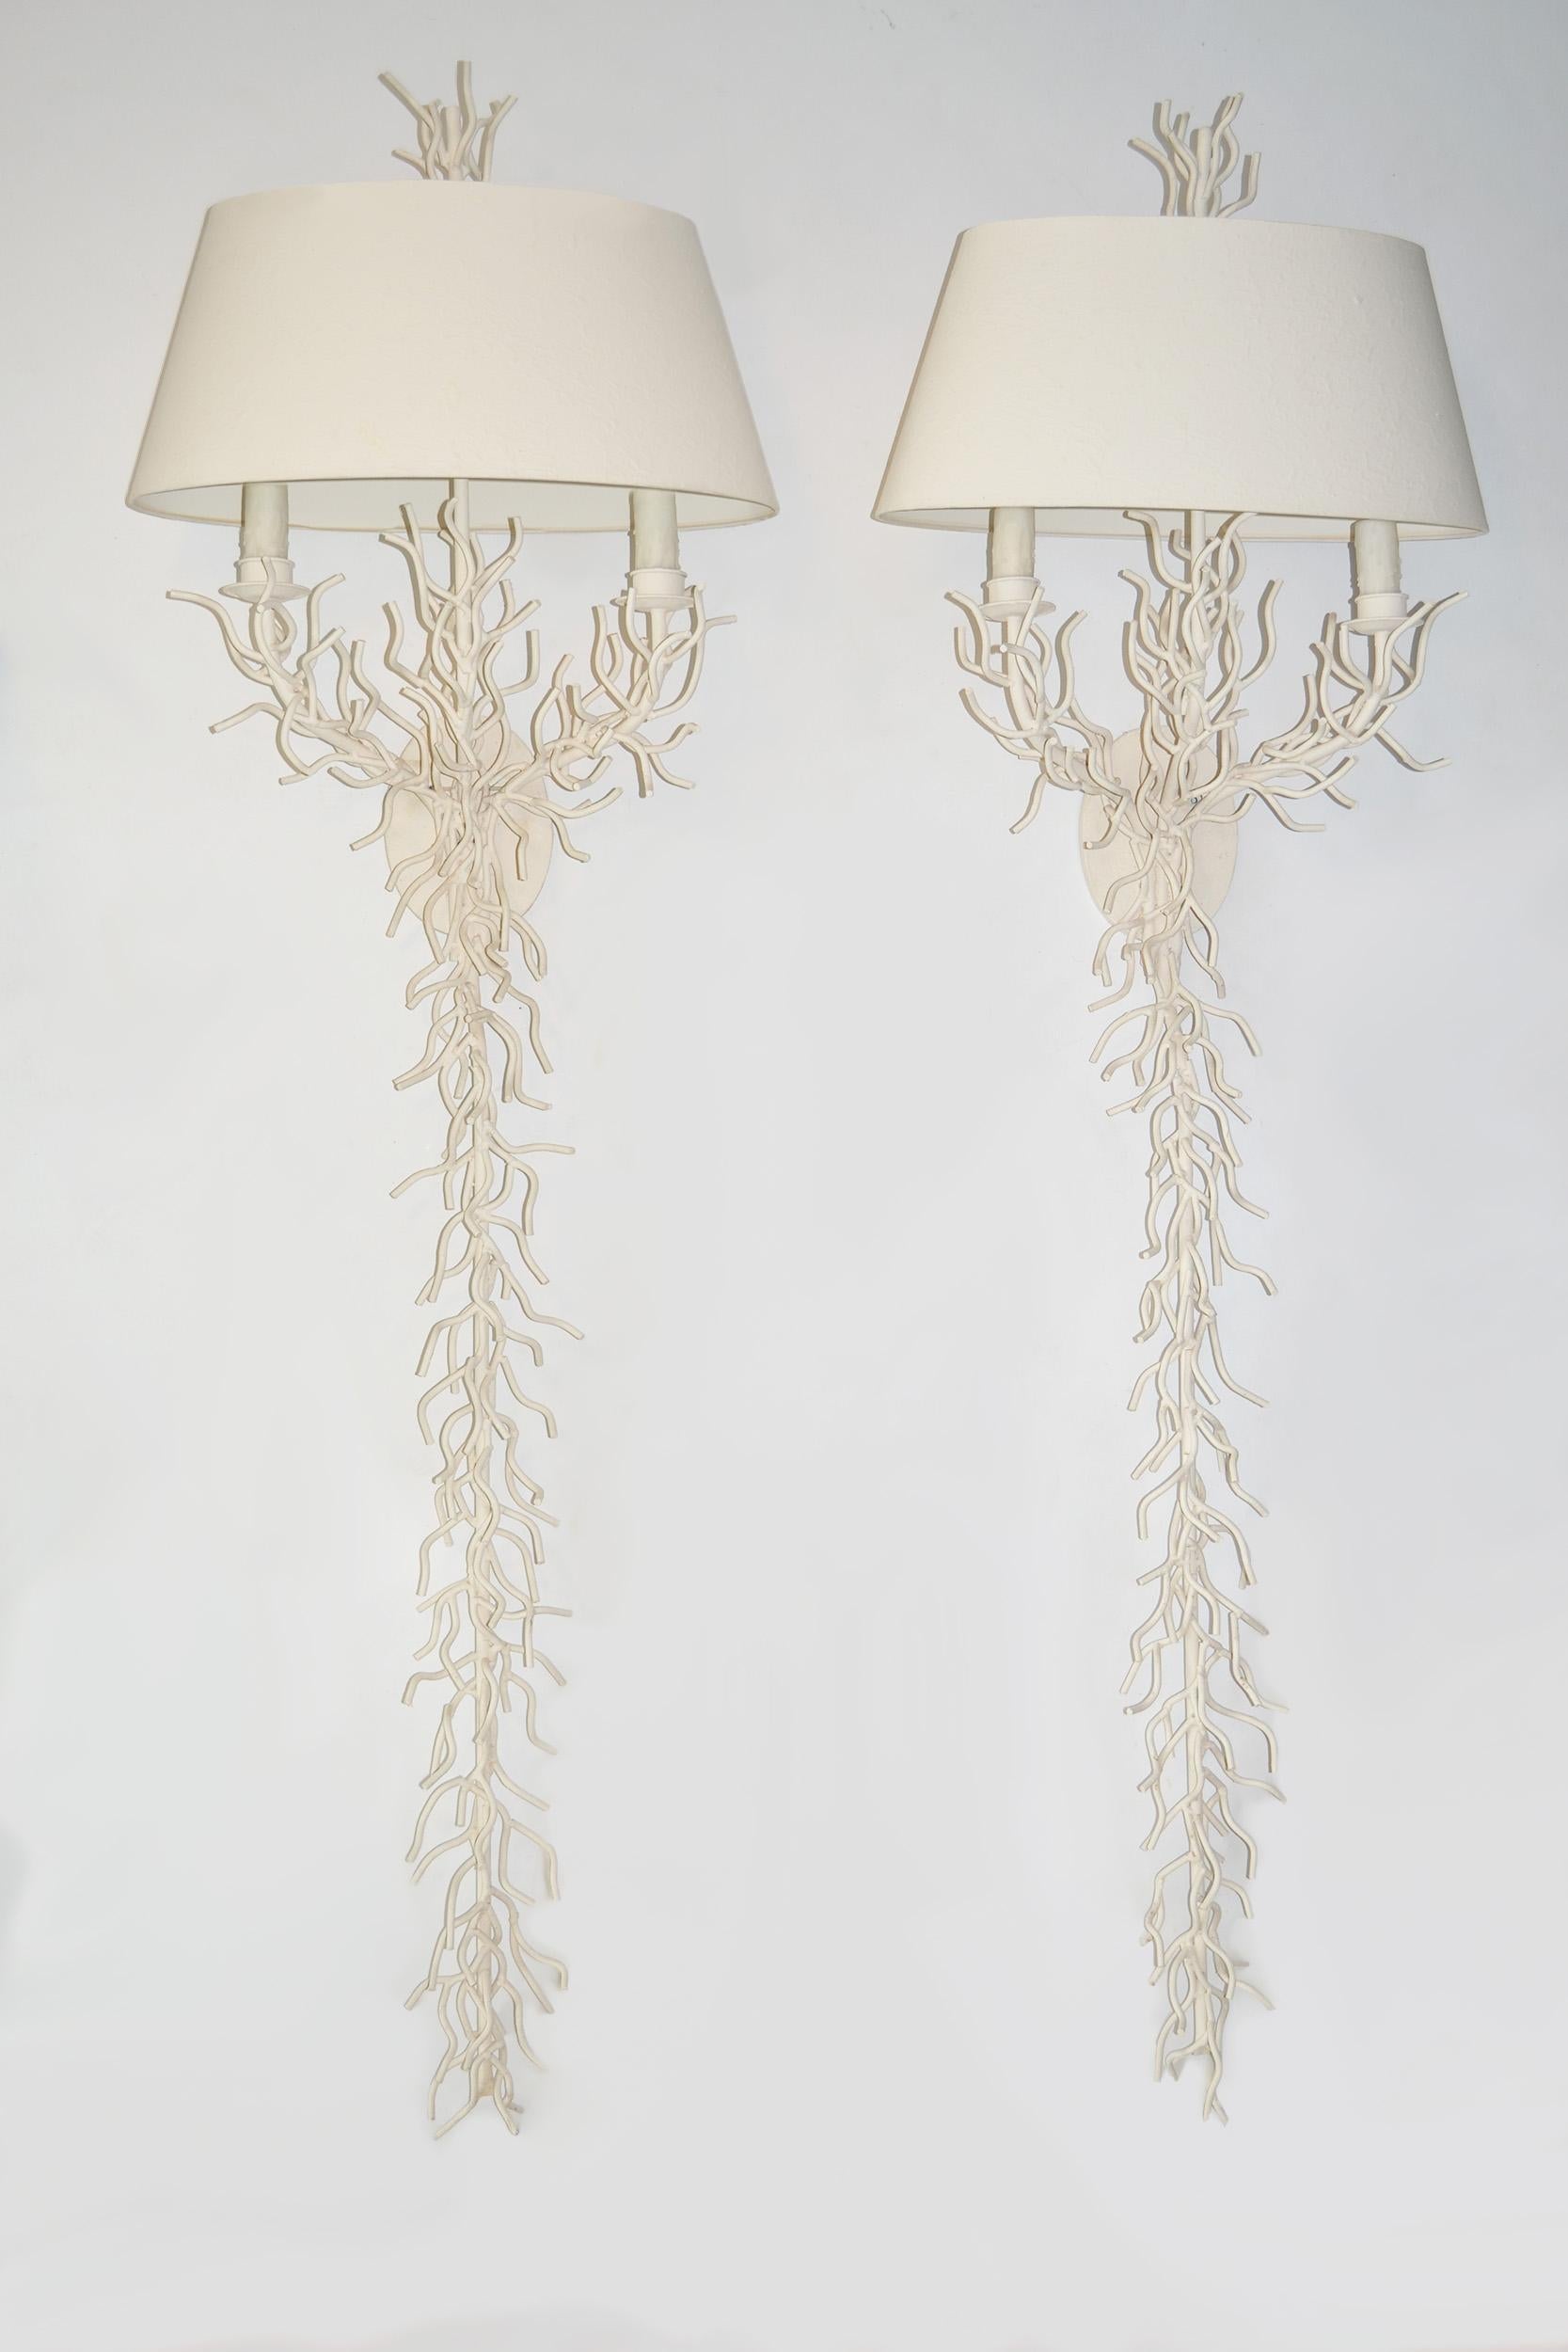 Pair of Faux Coral Wall Sconces with Shades, Regency, Miami Modern 
Pair or set of dramatic, tall mid-century, Regency, neoclassical, Miami modern faux coral wall sconces lamps or lights handcrafted in iron, painted white in a sea-inspired bleached